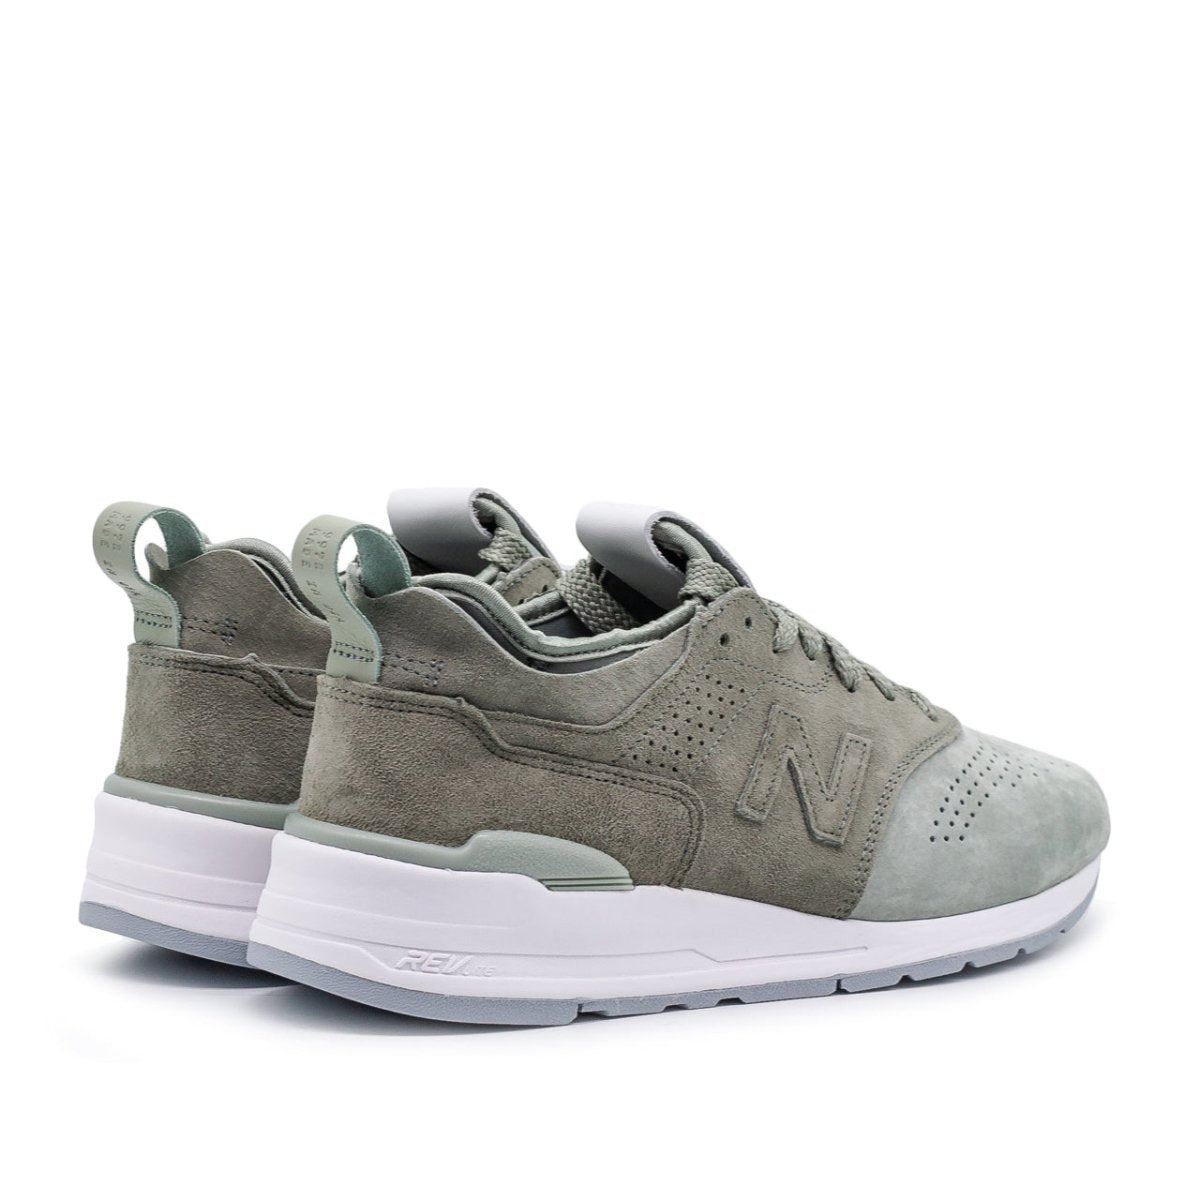 New Balance M 997 DT2 'Made in USA' (Graugrün)  - Allike Store